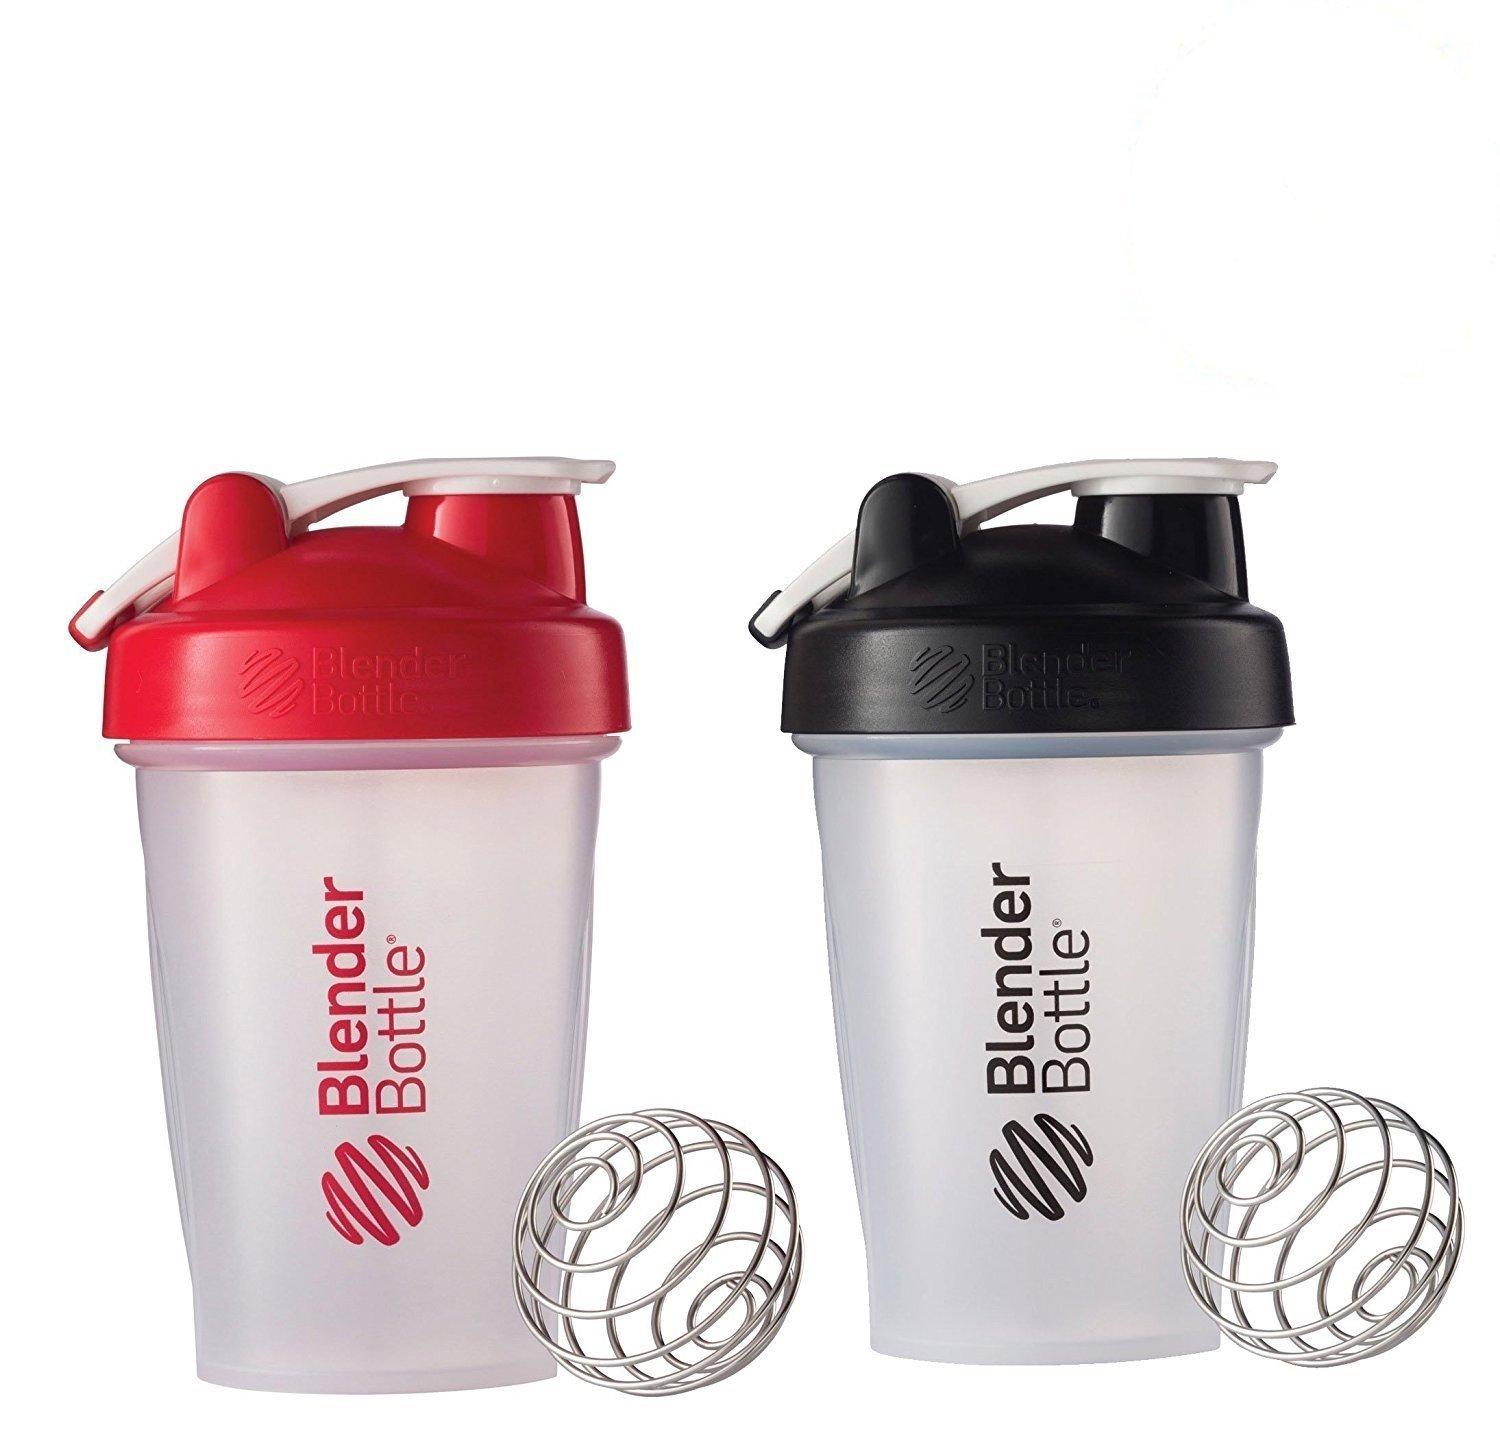 BlenderBottle 2 Pack with Stainless Steel Wire Whisk Ball - Two 20oz Bottles  for Protein Shakes and Supplements Colors May Vary